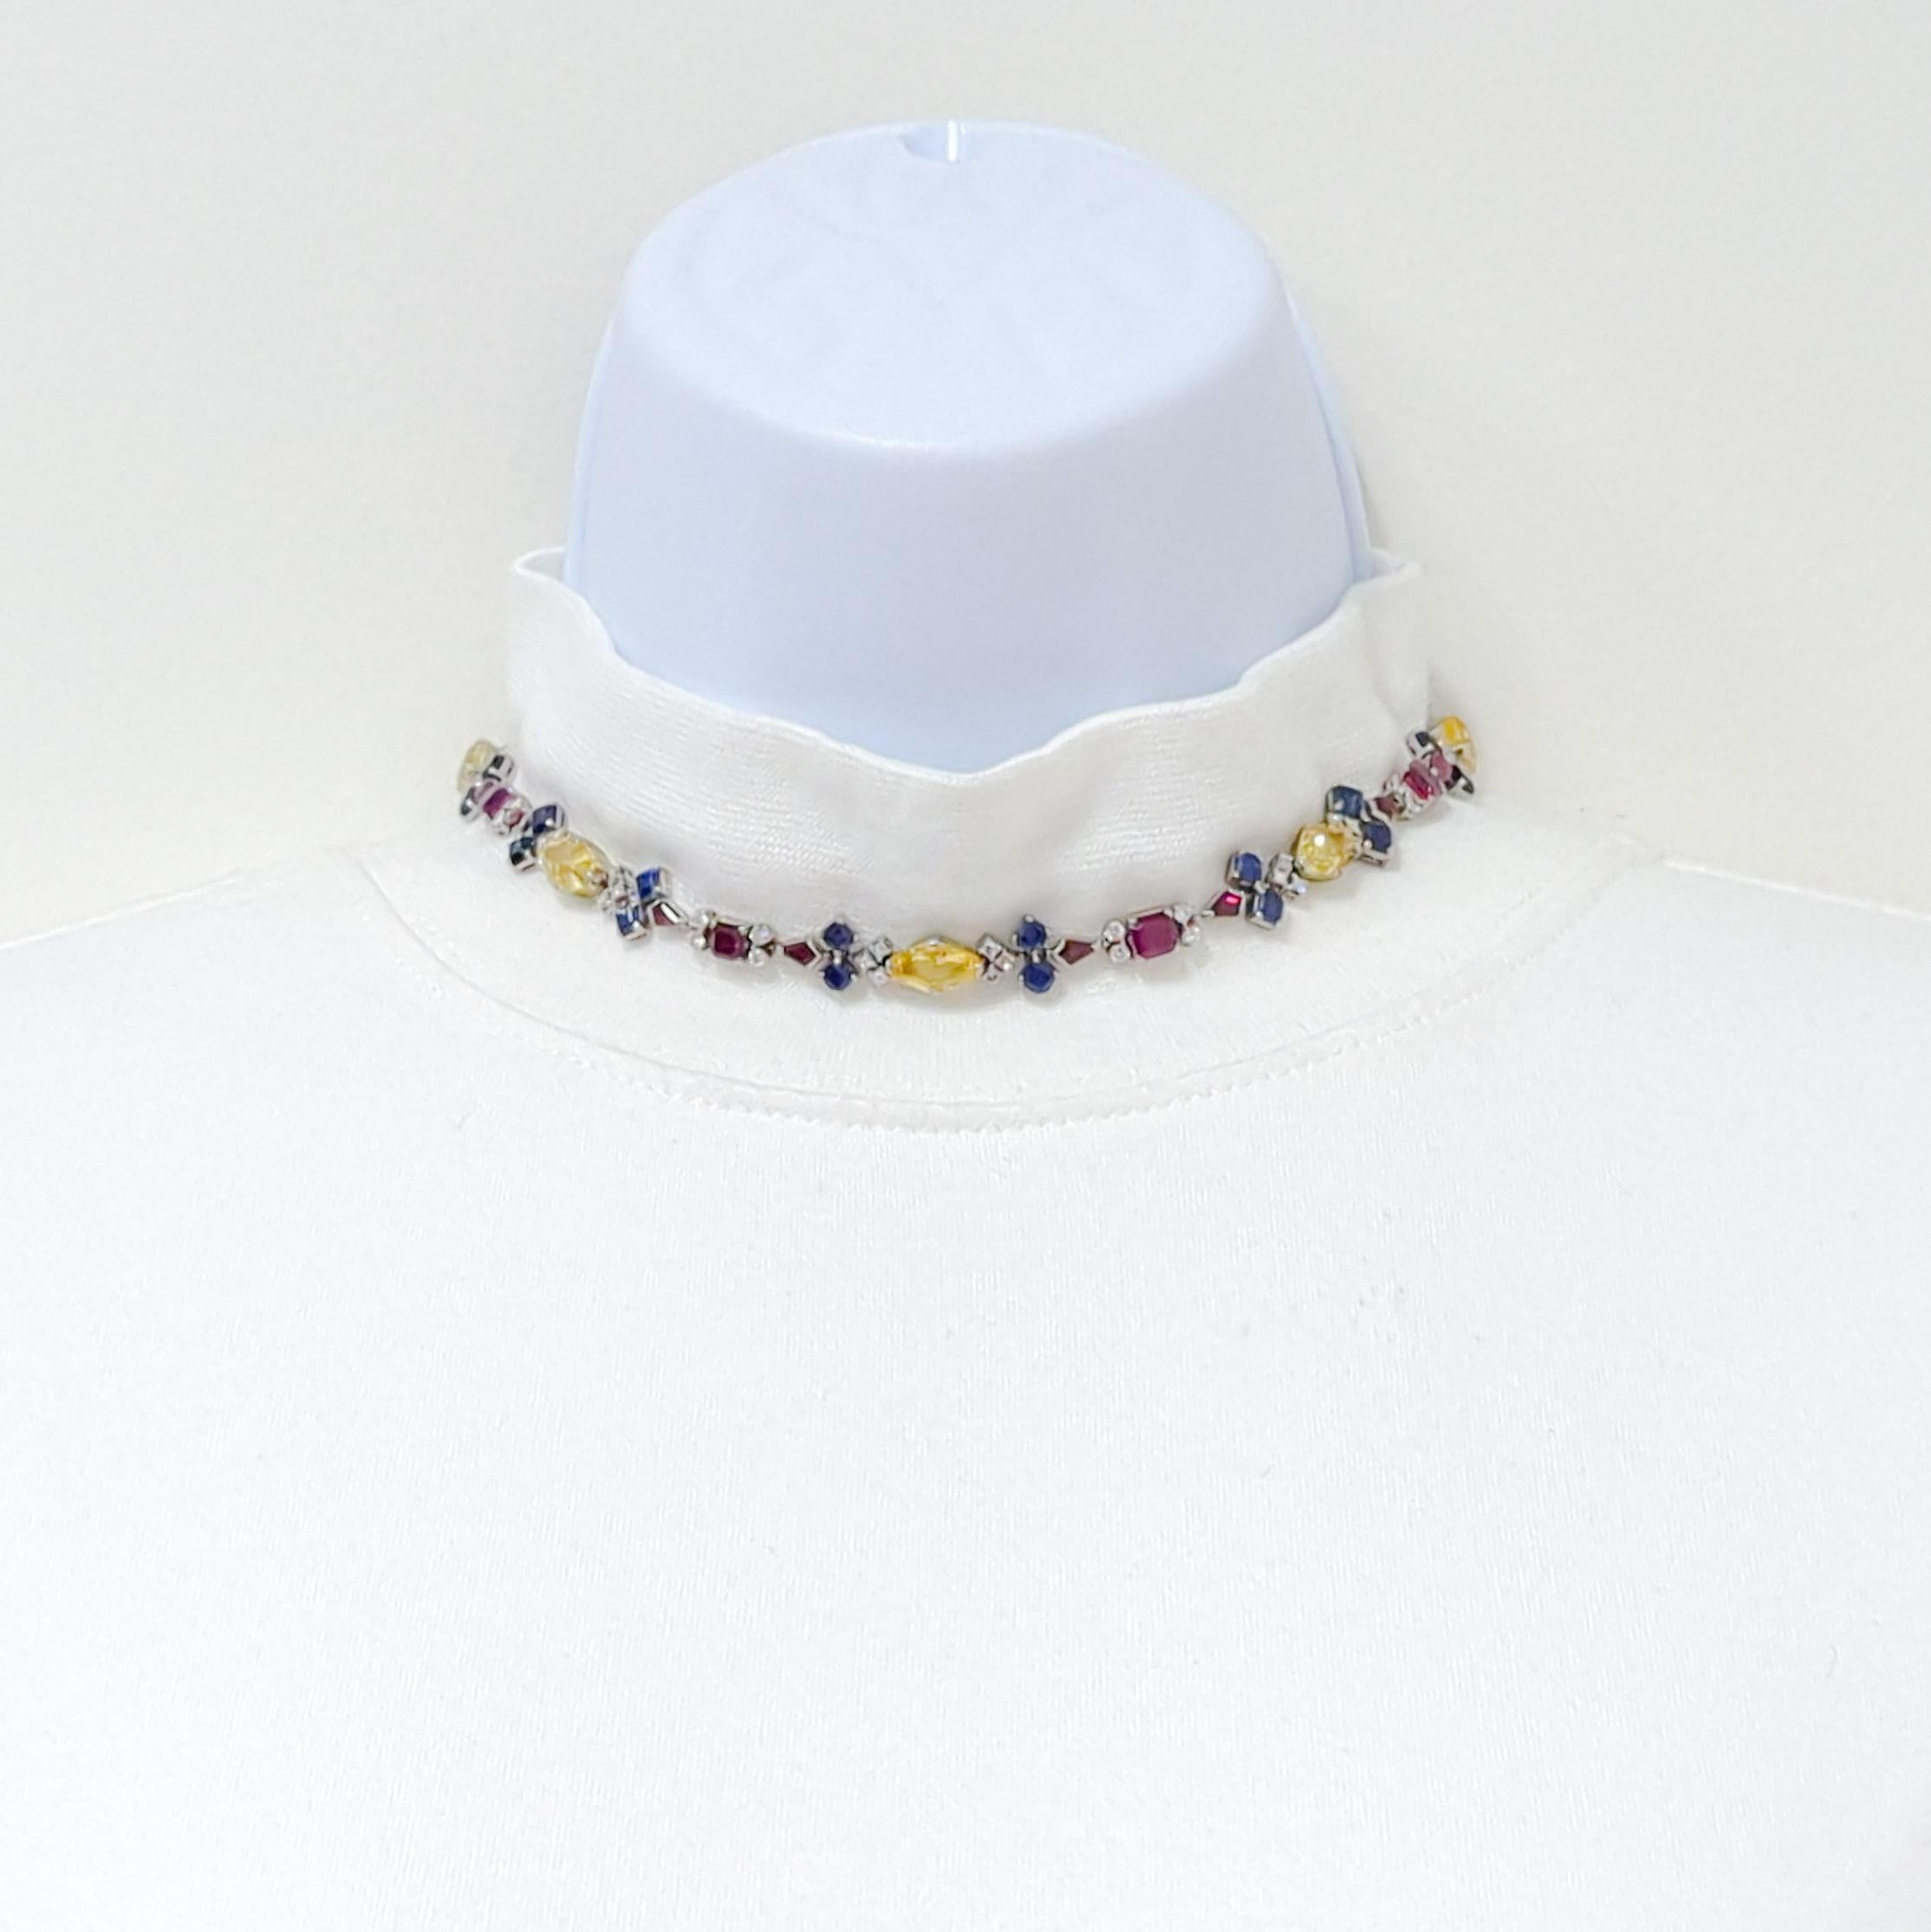 Beautiful multi color sapphire, ruby and white diamond necklace handmade in platinum and 14k white gold.  This necklace can be worn as a double row bracelet also.  There are matching earrings available.